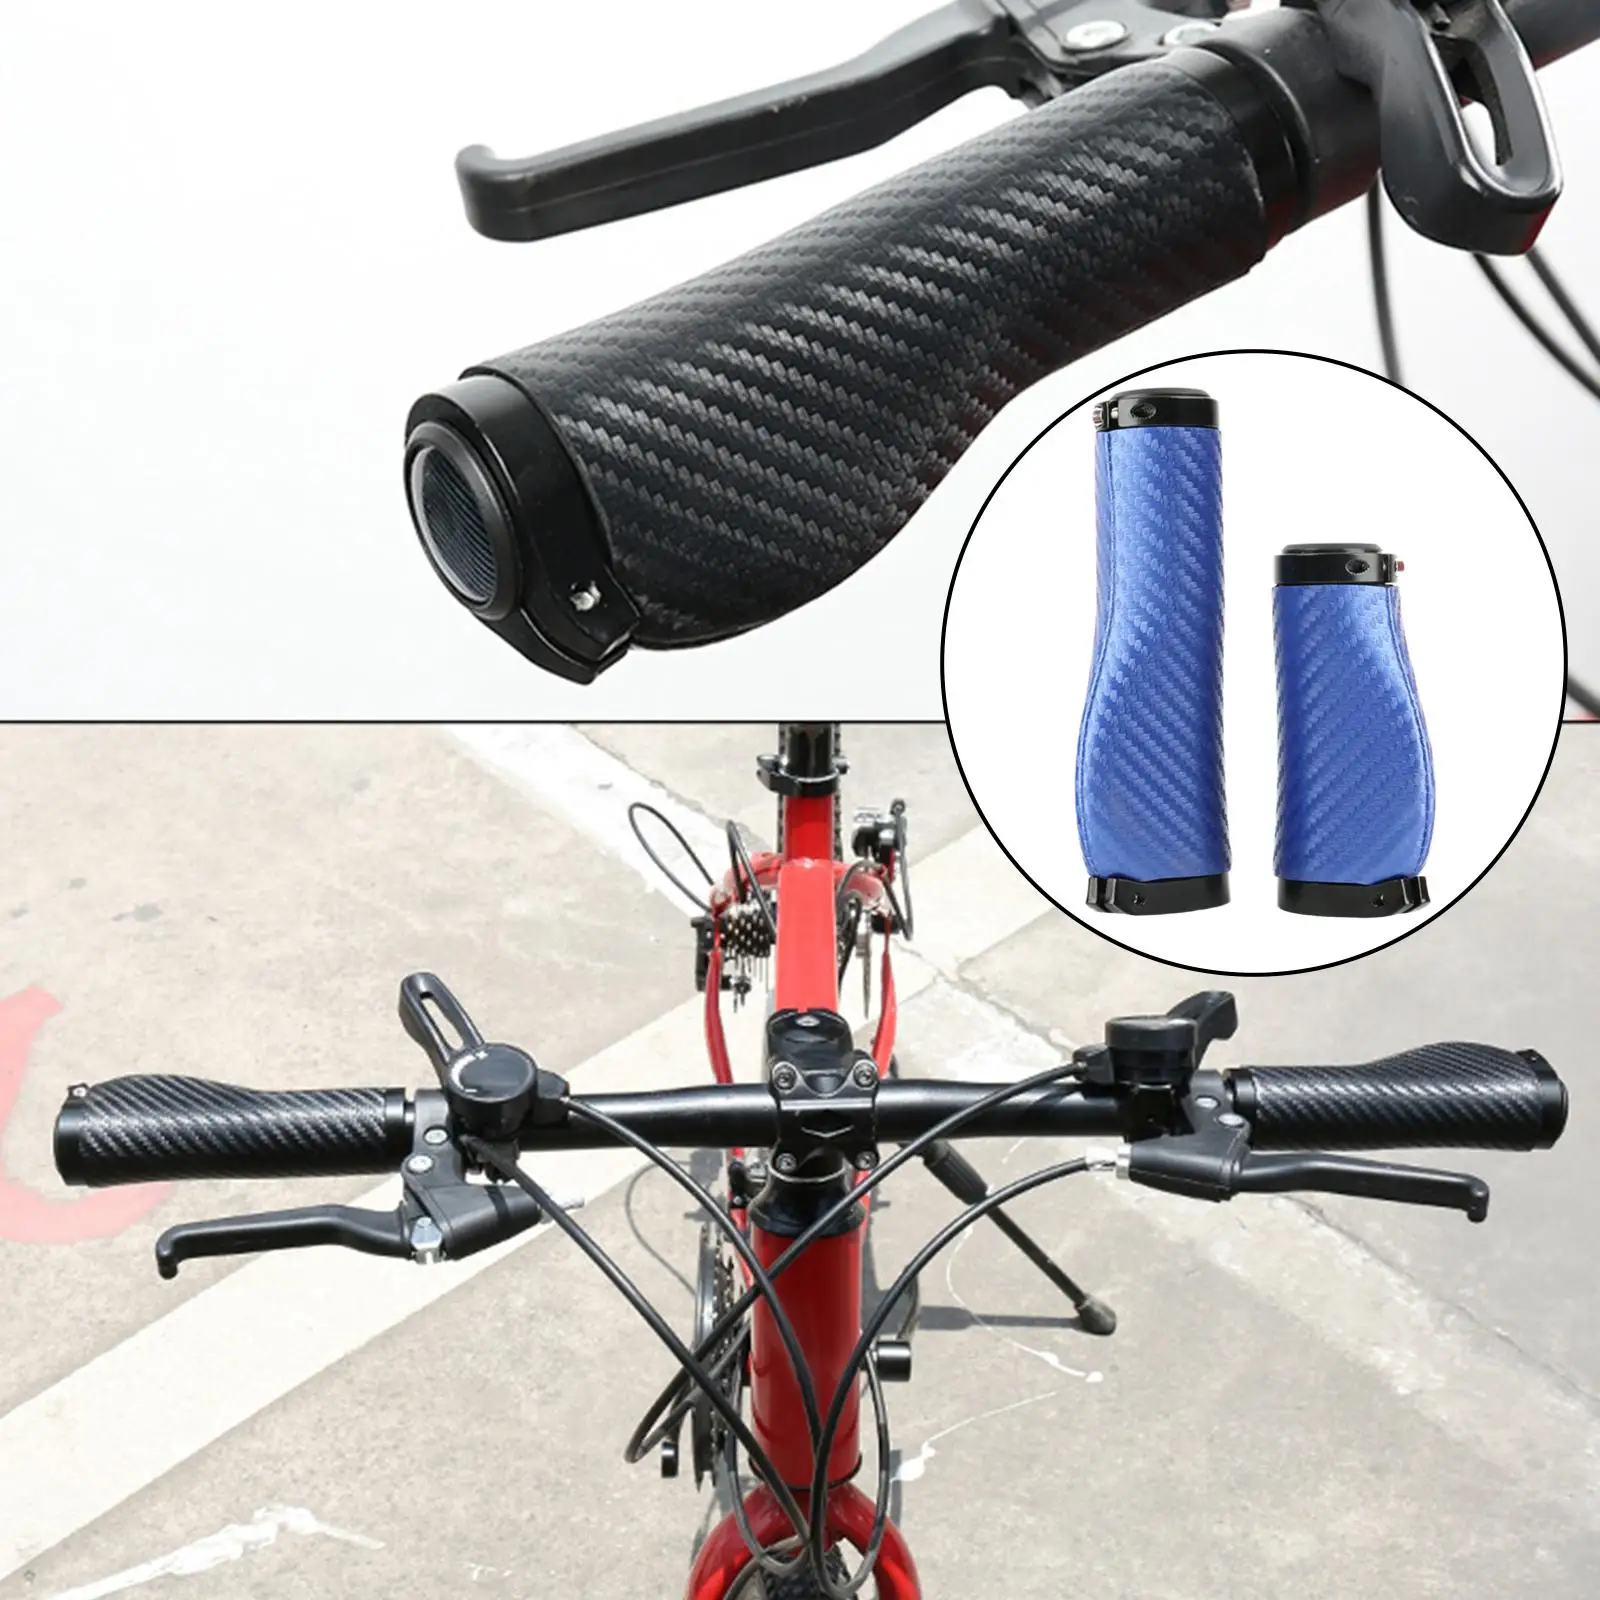 2Pcs PU Leather Bicycle Handlebar Grips Anti Skid Lockable Carbon Fiber Style Bar Grips for Road Bike MTB Riding Bicycle Grips